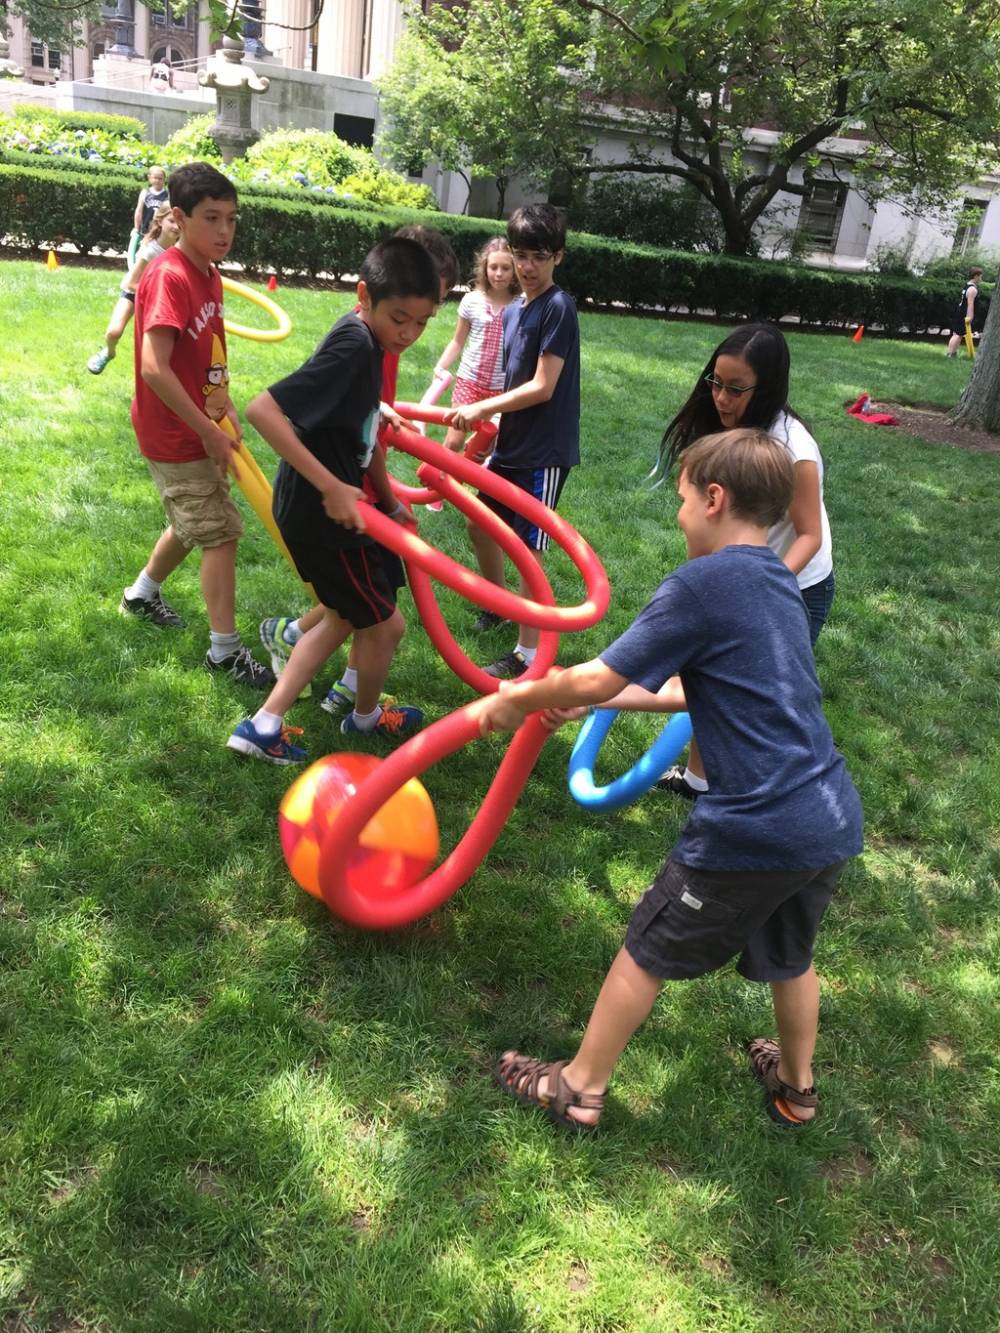 TOP NEW YORK TENNIS CAMP: Columbia University - Little Lions Camp is a Top Tennis Summer Camp located in New York New York offering many fun and enriching Tennis and other camp programs. 